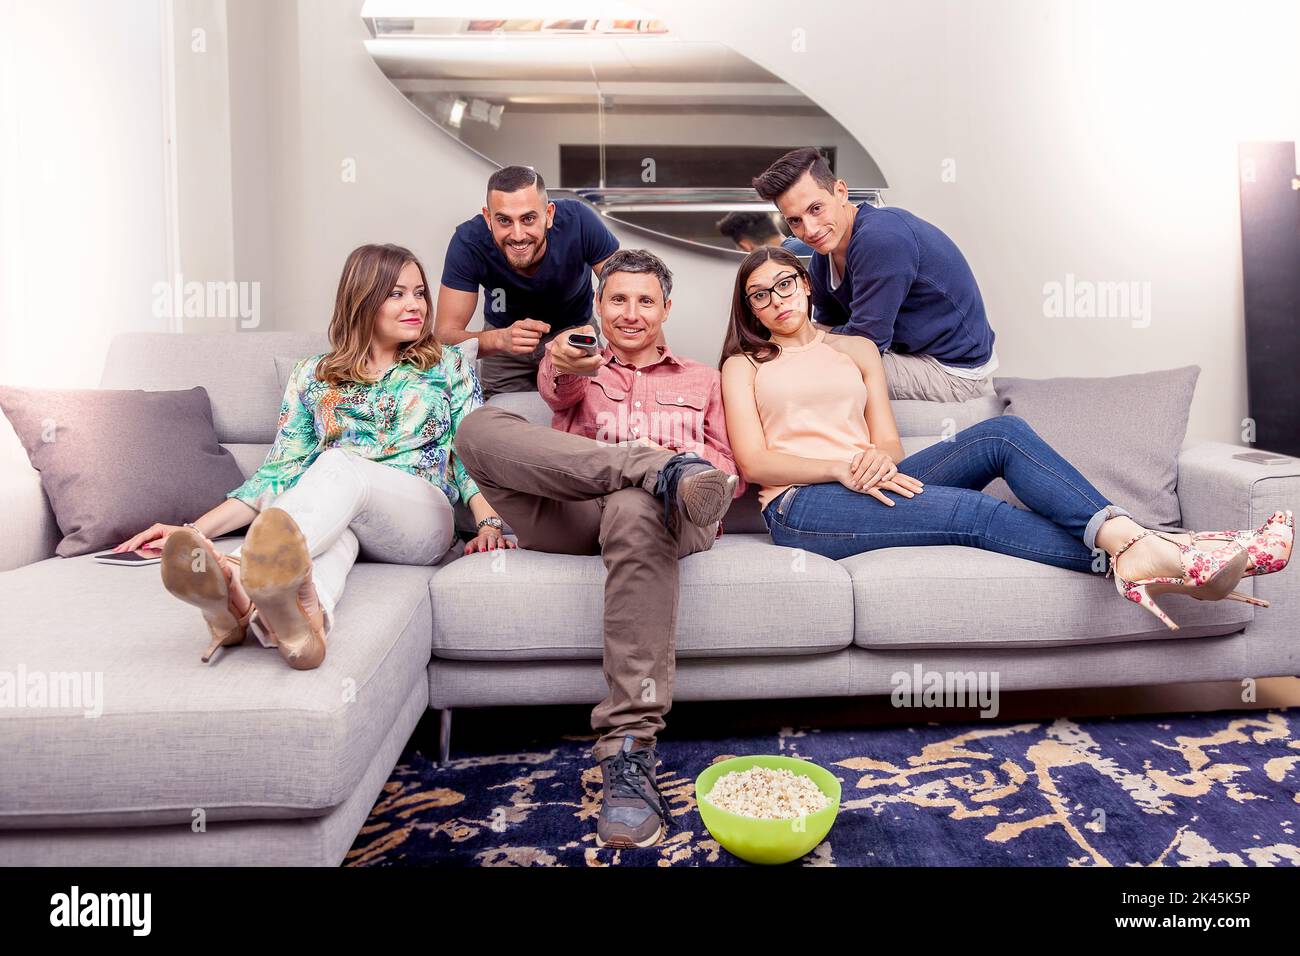 group of friends sitting on the couch turns on the TV with the remote control Stock Photo